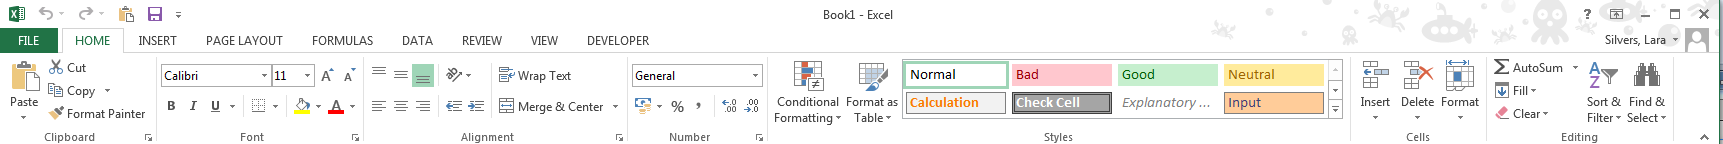 The Excel ribbon